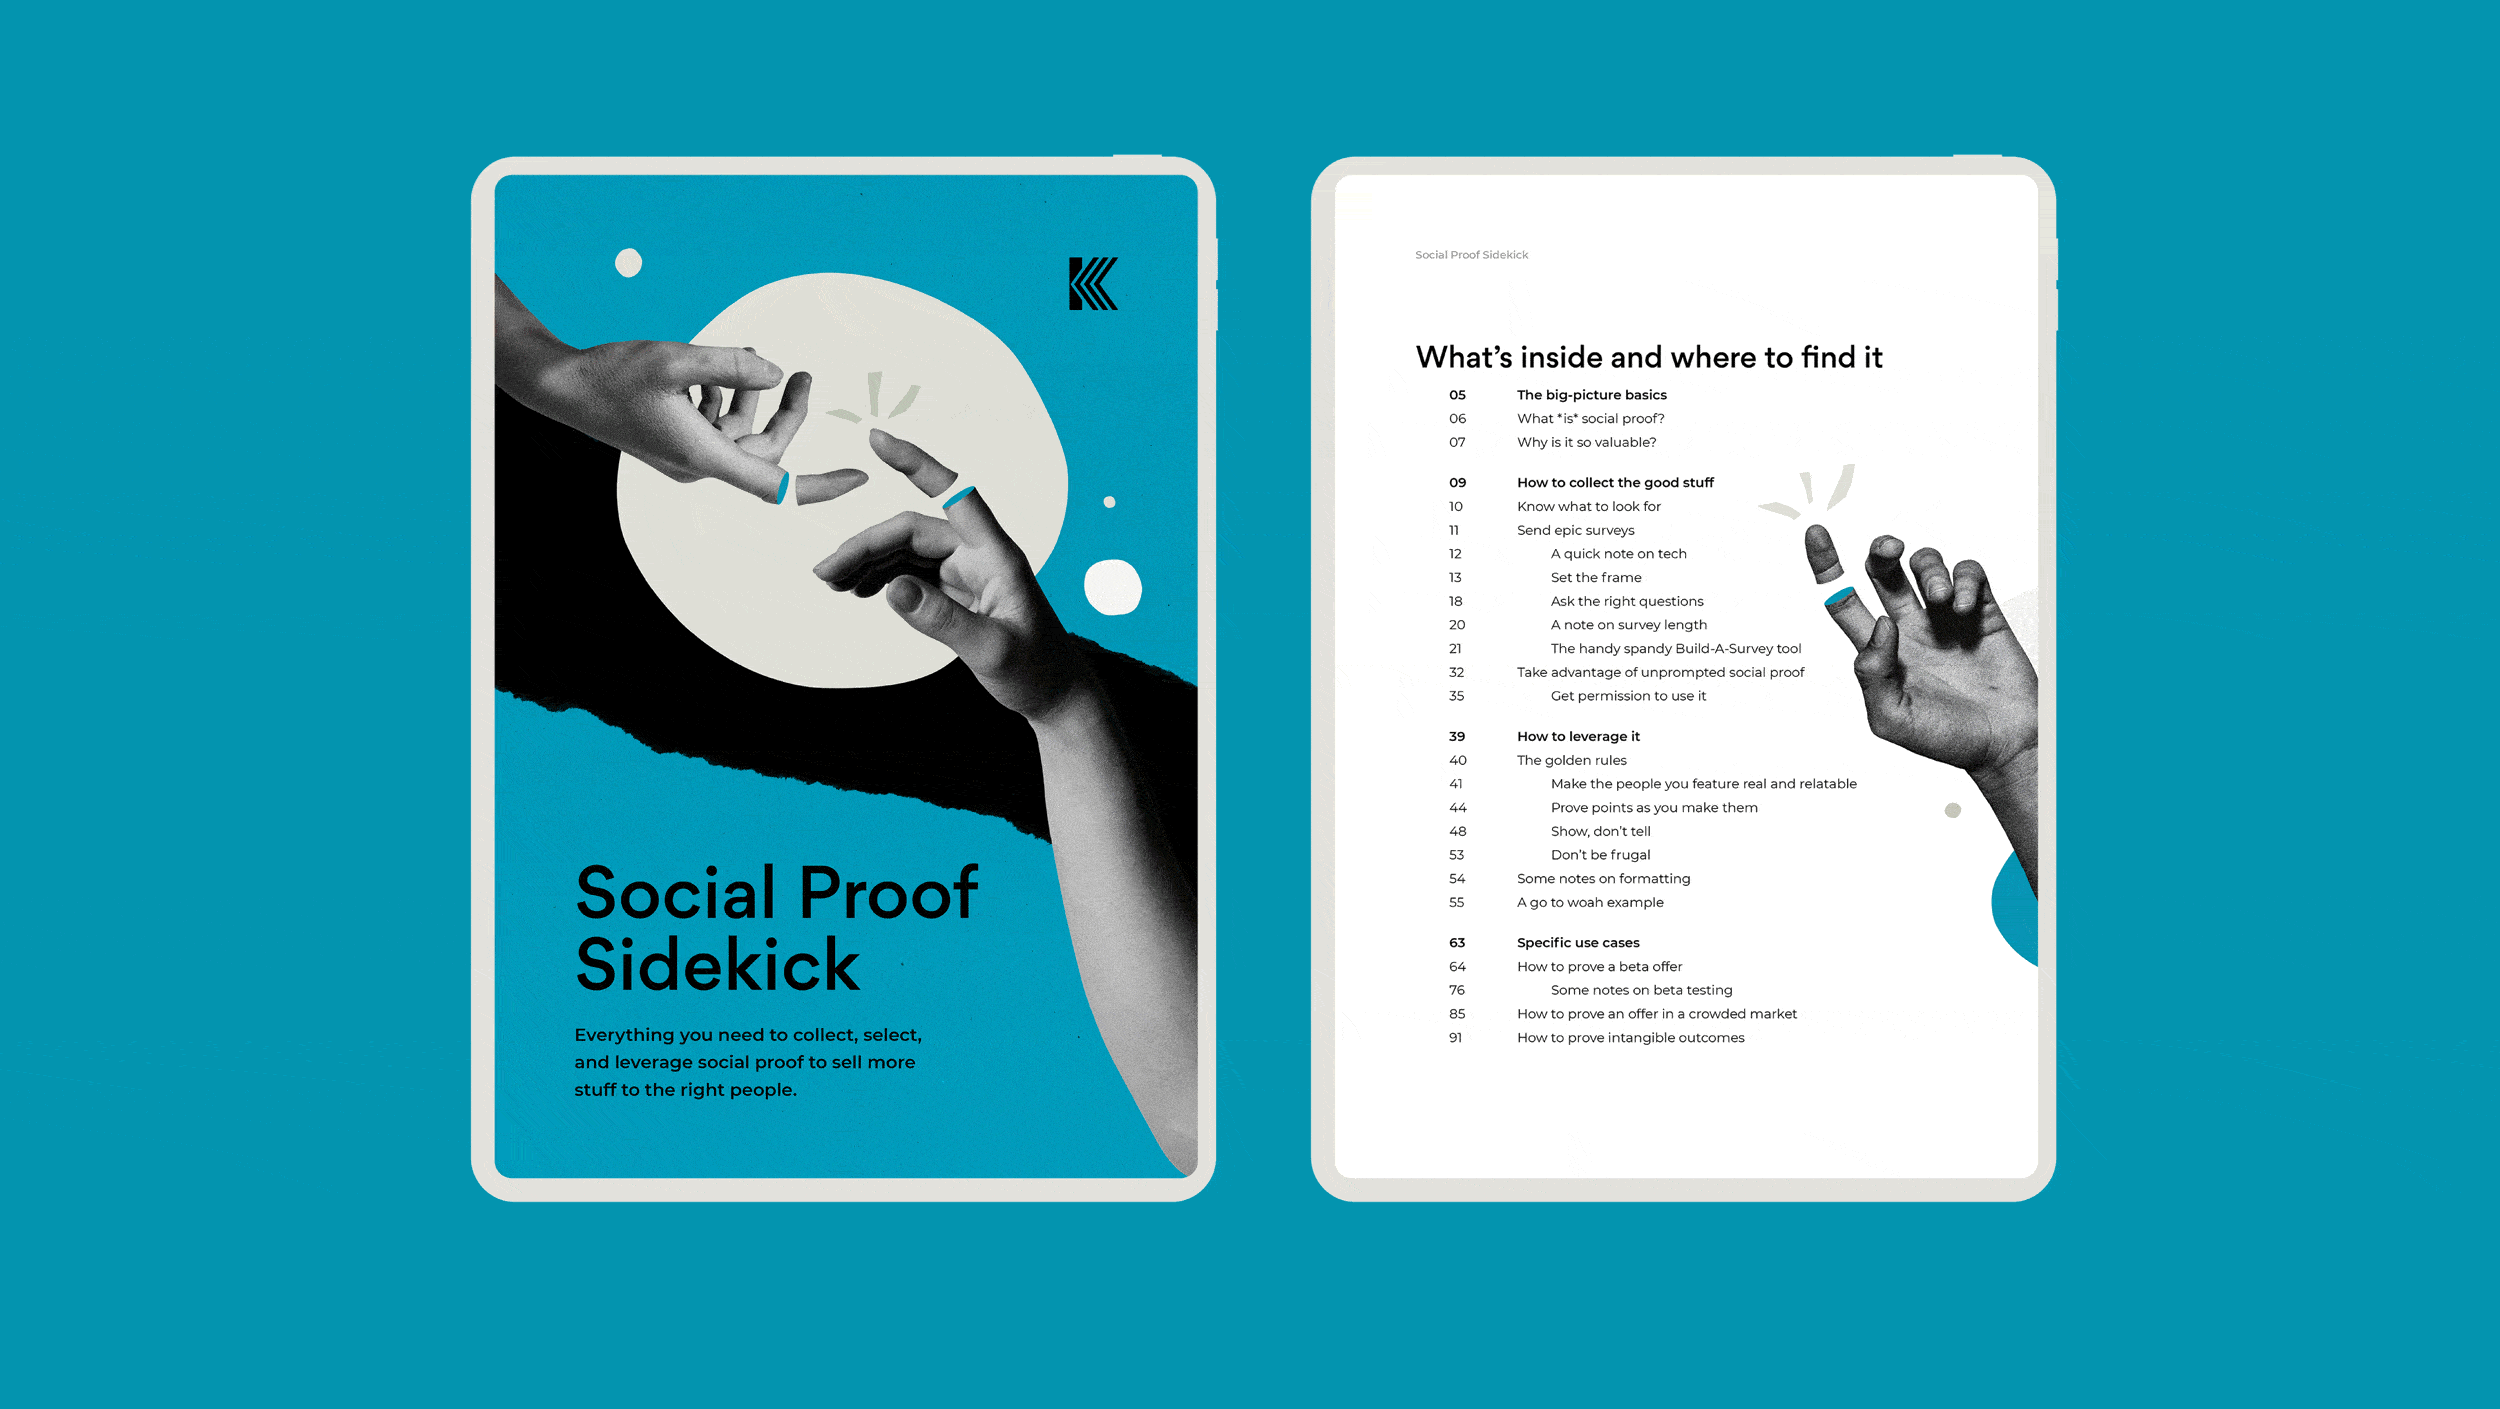 Brand identity case study for the social proof sidekick shows two ipads on a blue background cycling between pages of the ebook. A clean layout, annotations and title page collages are present.